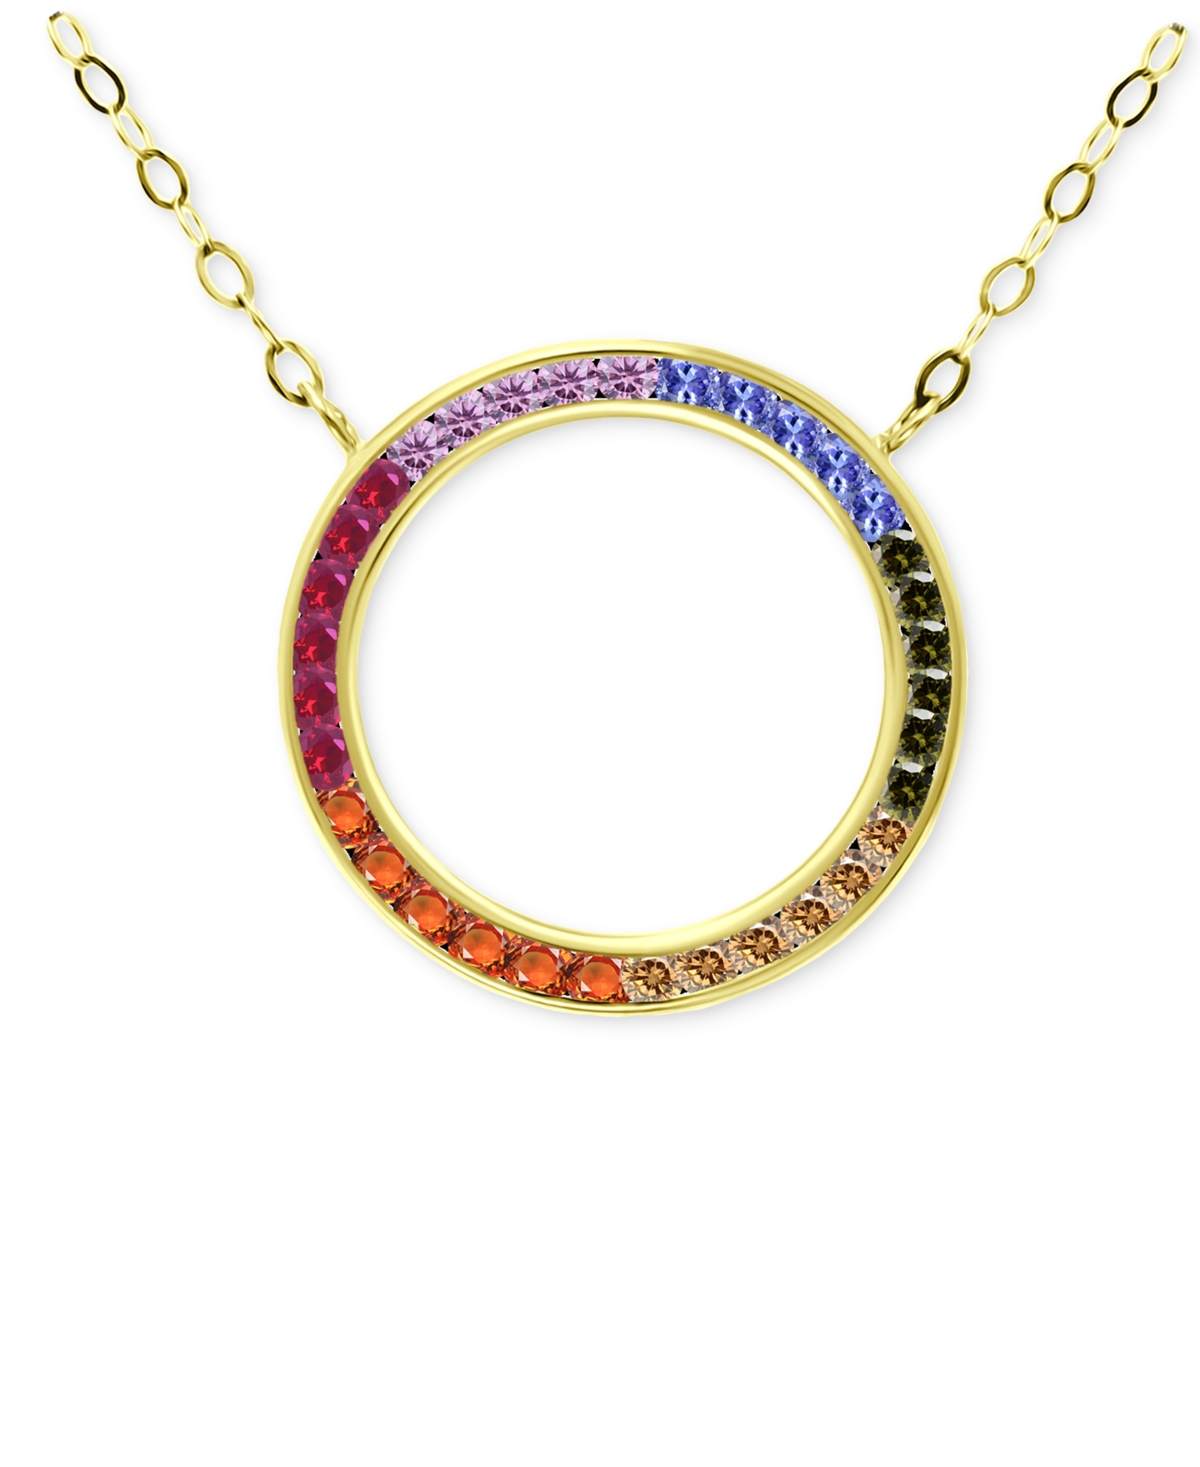 Giani Bernini Rainbow Cubic Zirconia Open Circle Pendant Necklace In 18k Gold-plated Sterling Silver, 16" + 2" Ext